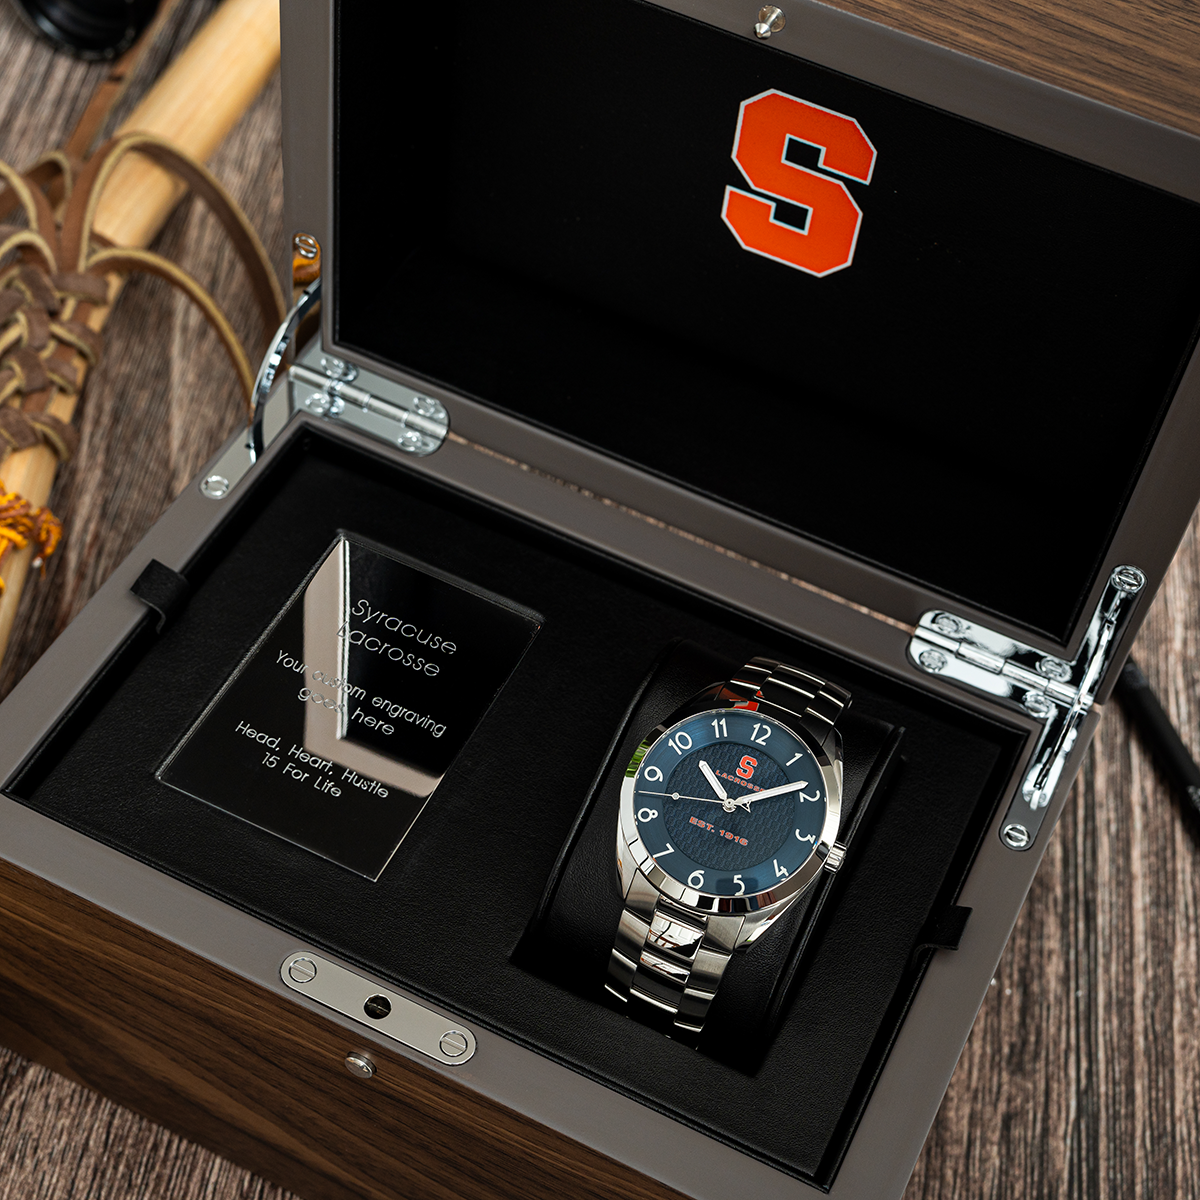 Syracuse lacrosse Swiss made automatic watch. Display box with steel bracelet.